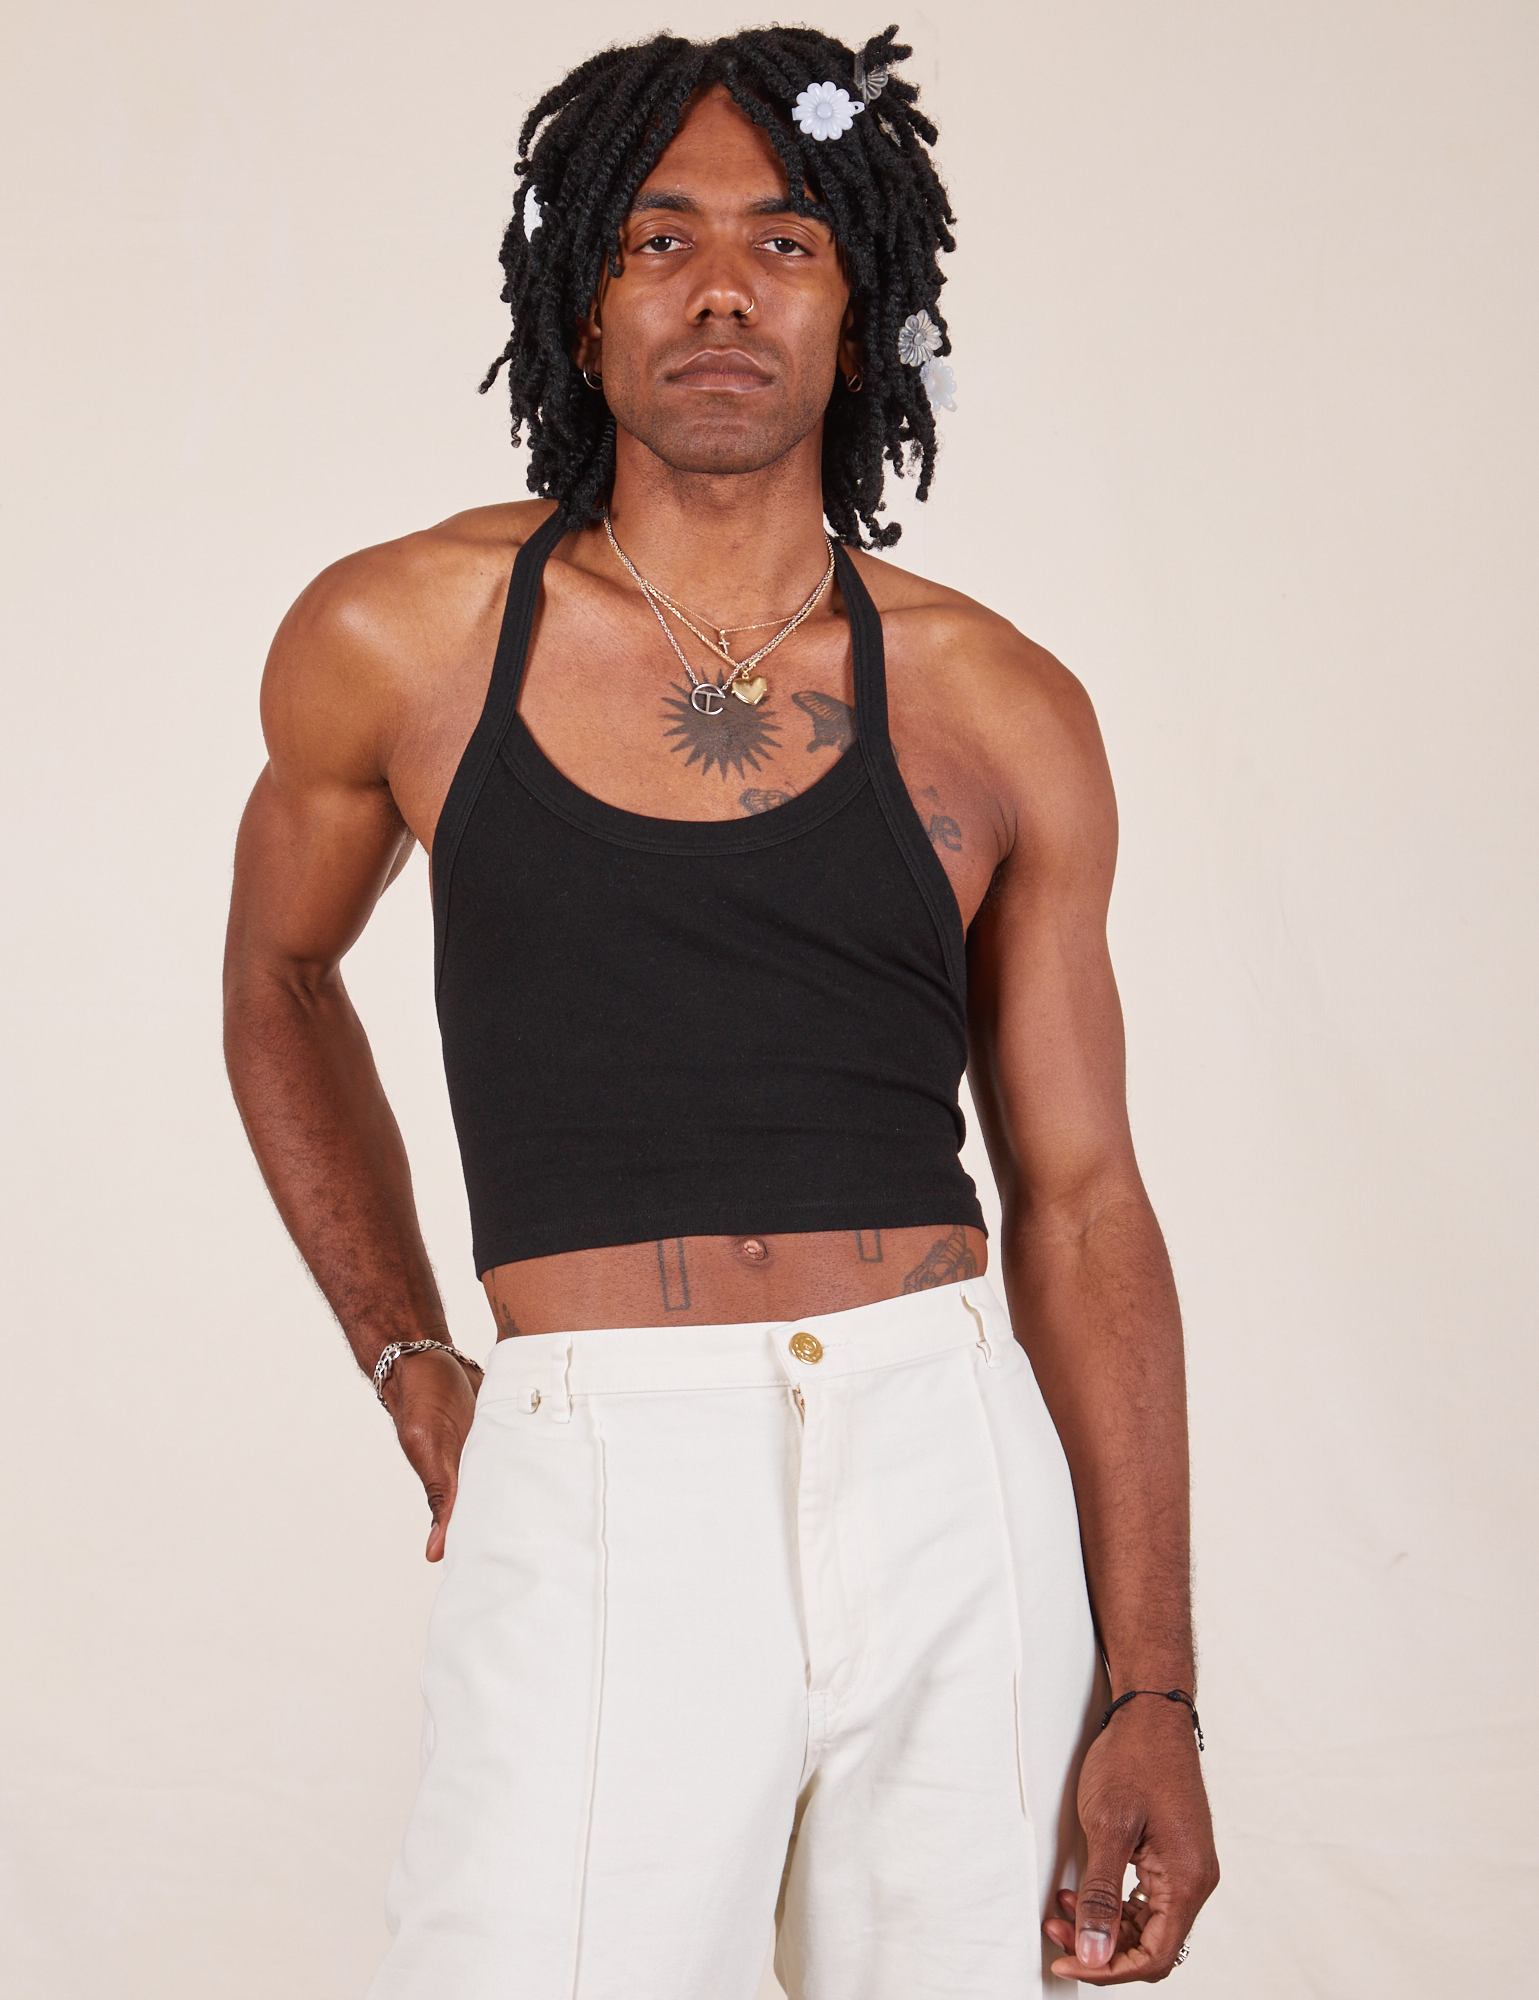 Jerrod is 6&#39;3&quot; and wearing XS Halter Top in Basic Black paired with vintage off-white Western Pants